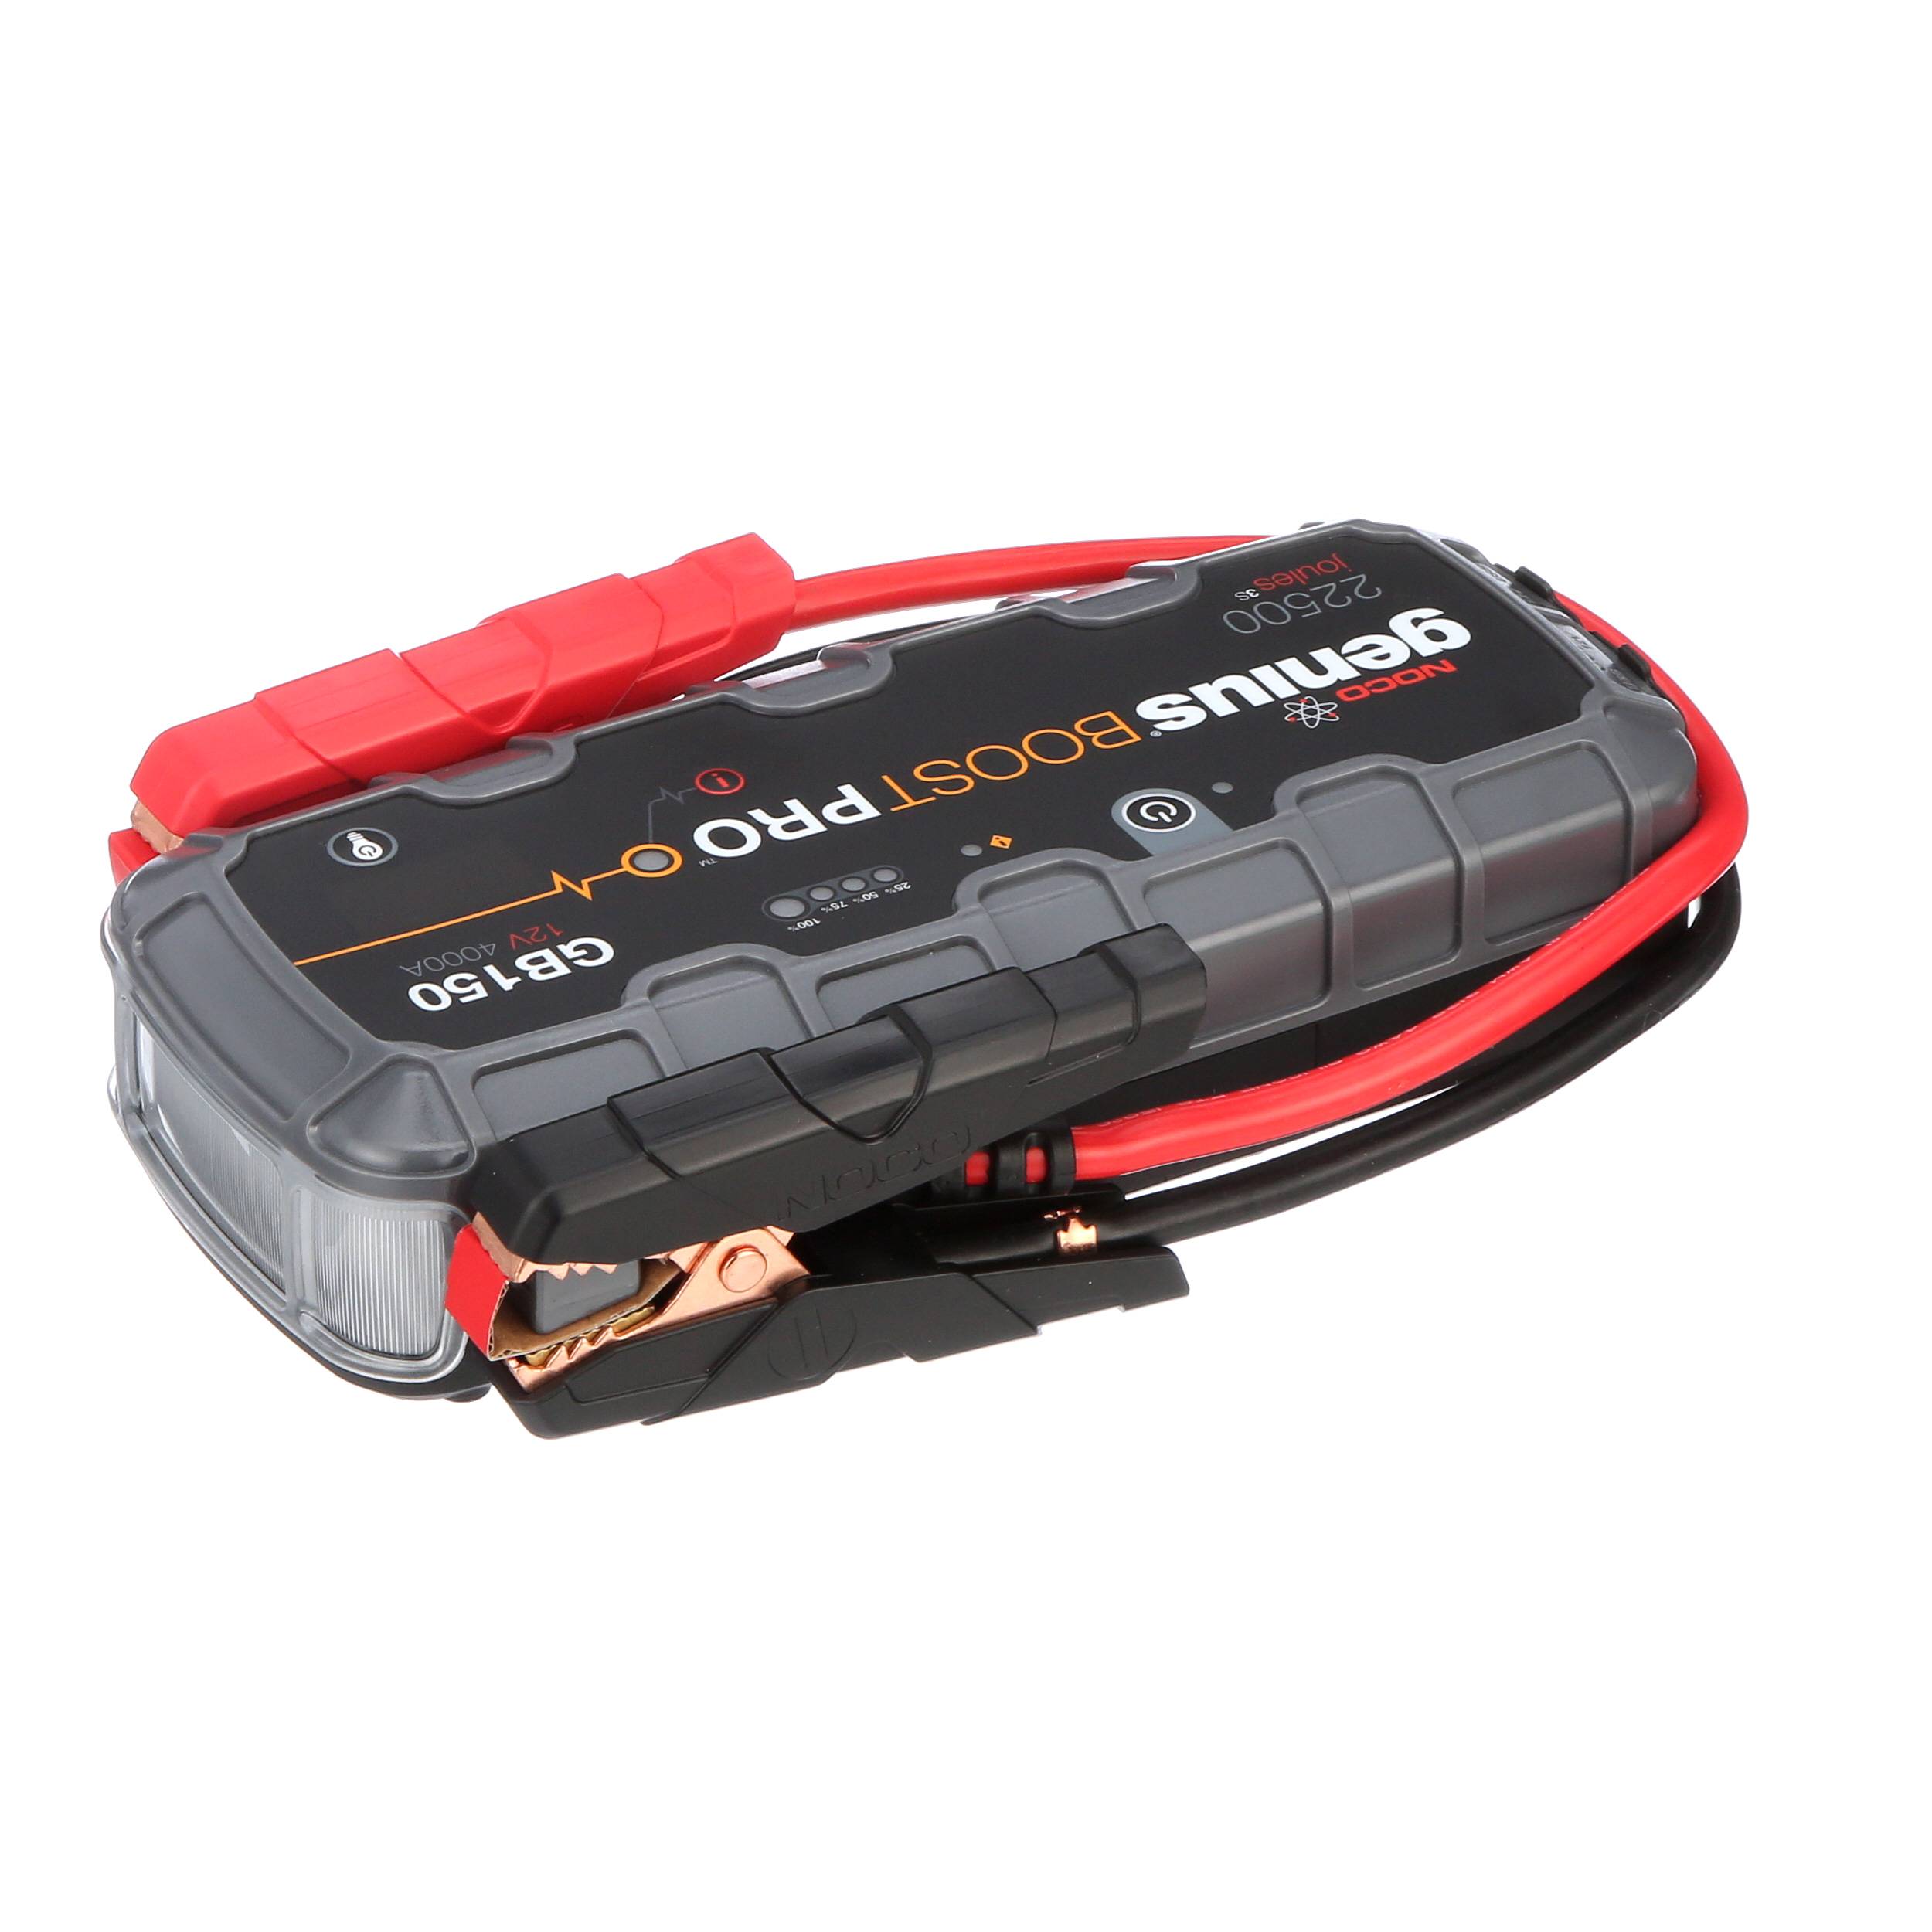 GB150 Noco BOOST PRO Battery Jump Starter - GoBatteries